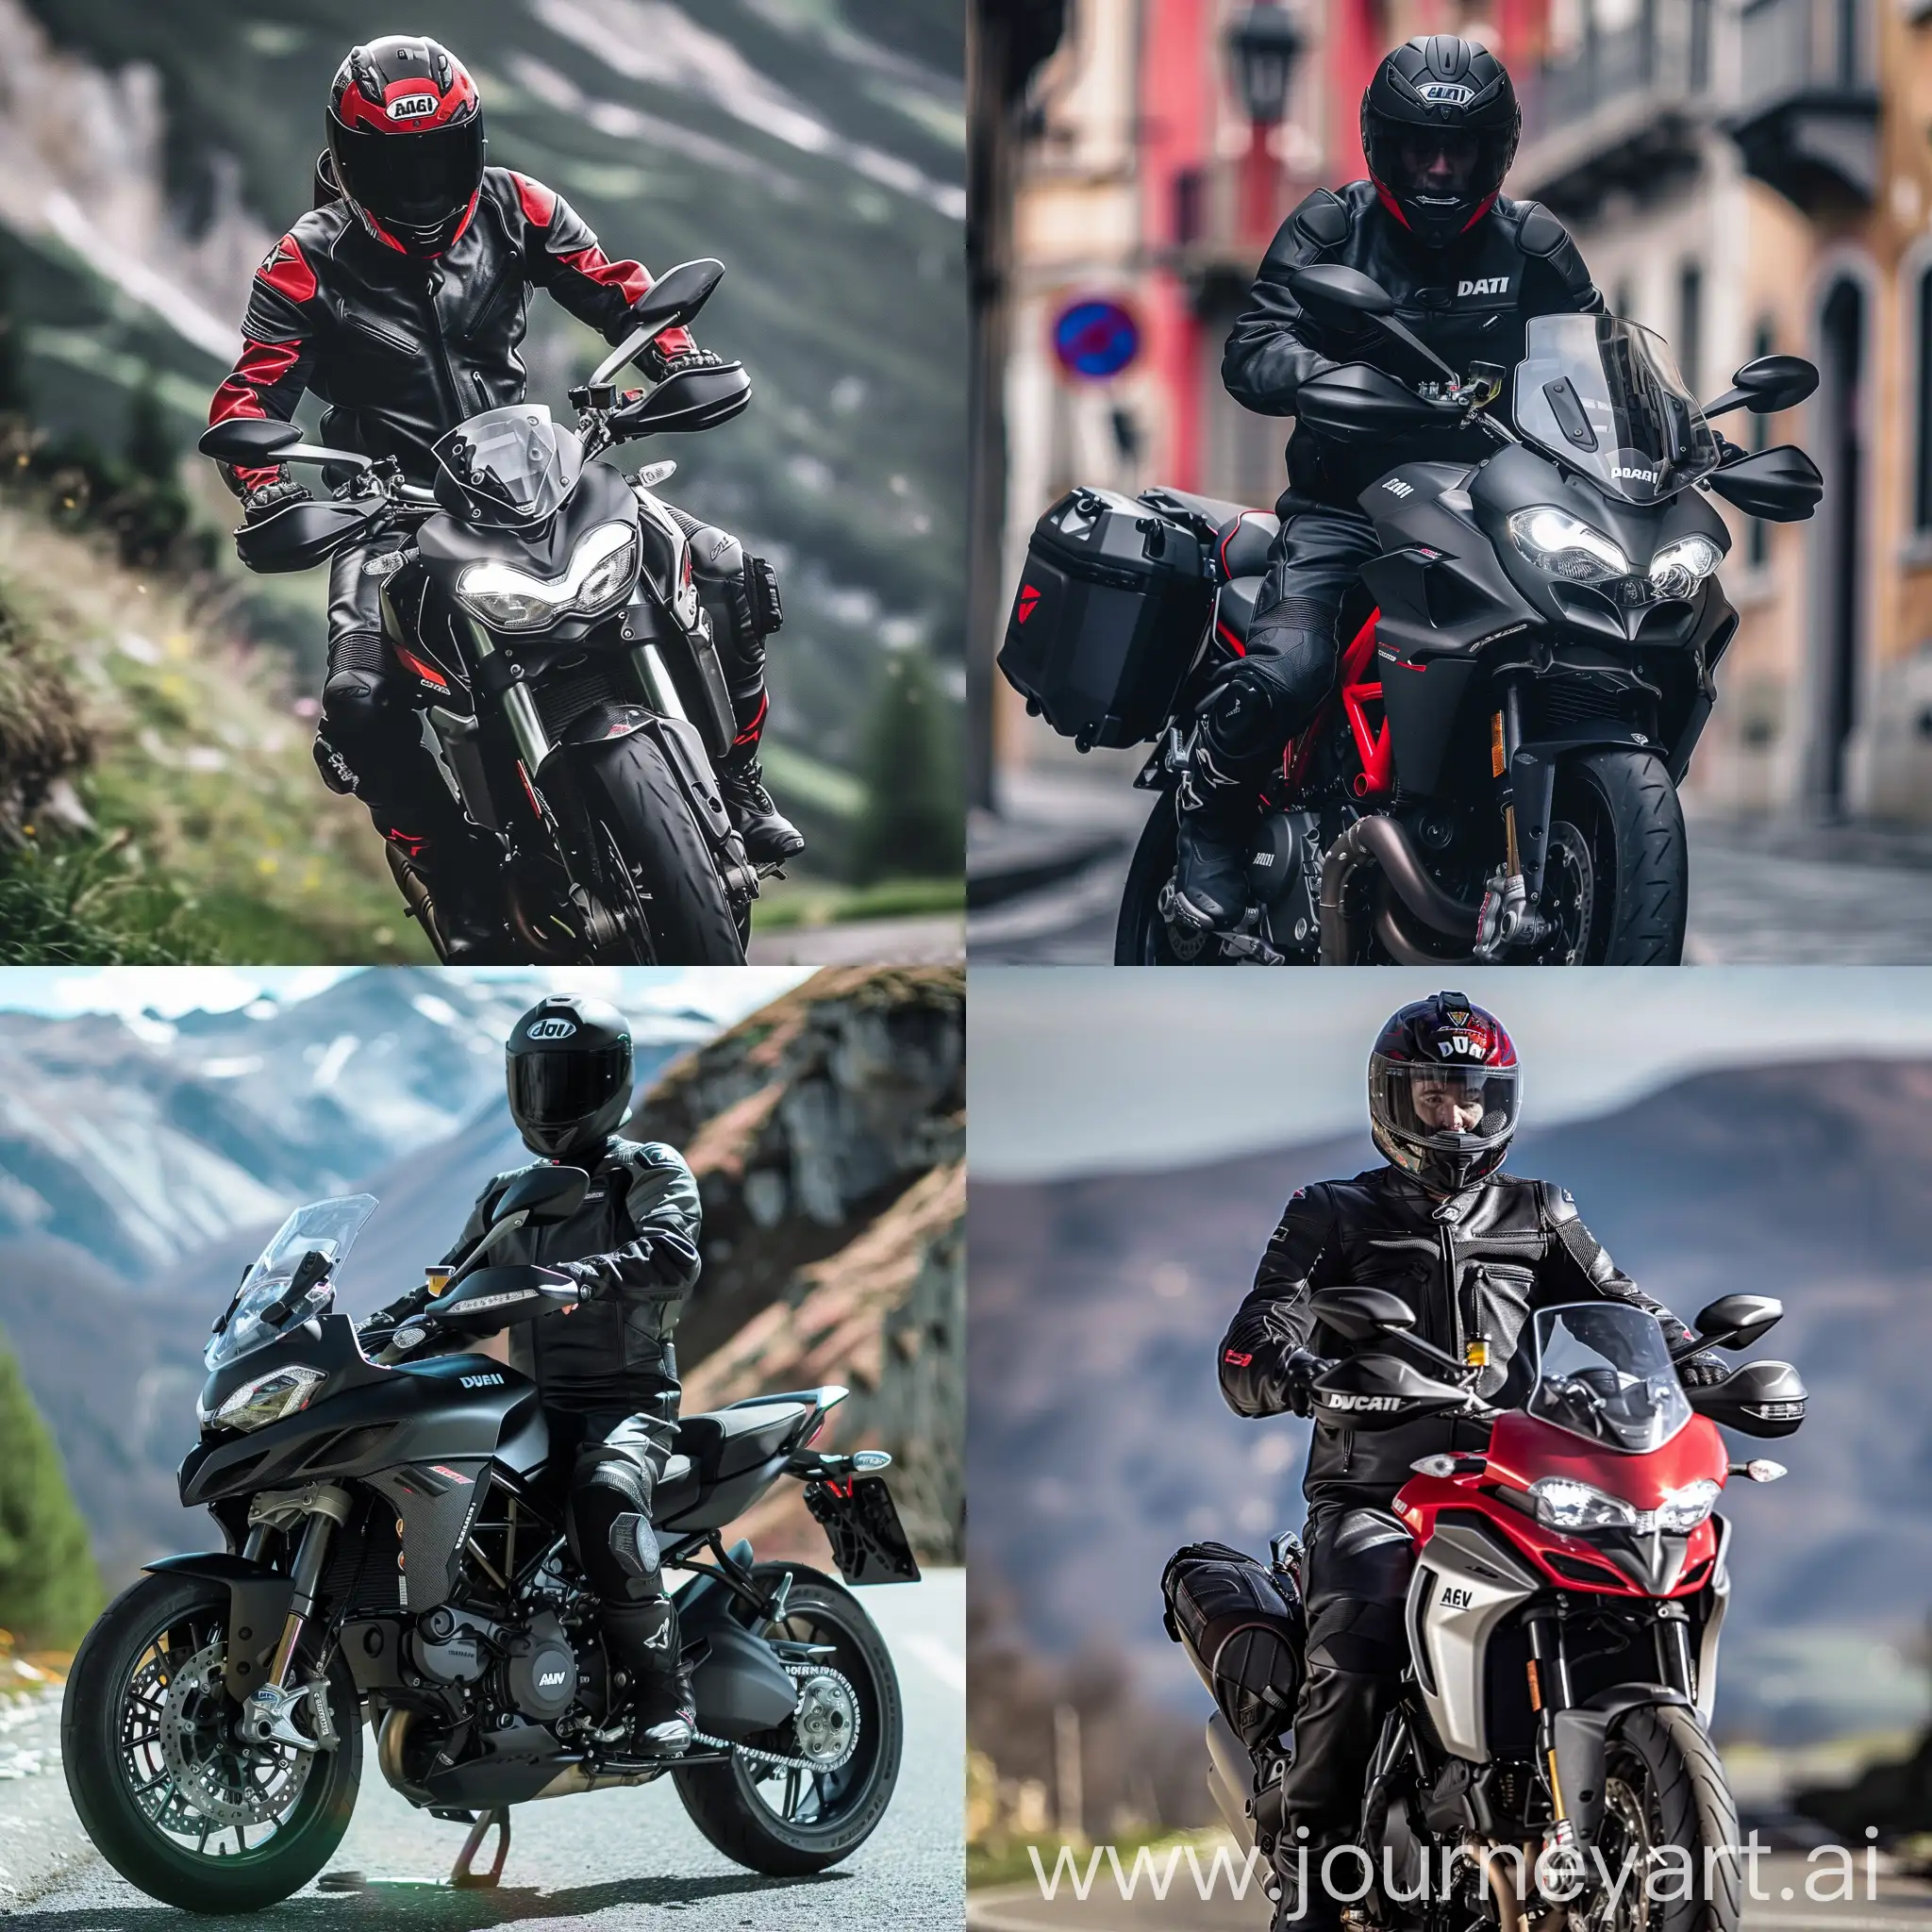 Biker-Riding-Ducati-Multistrada-in-Dainese-Leather-and-AGV-Helmet